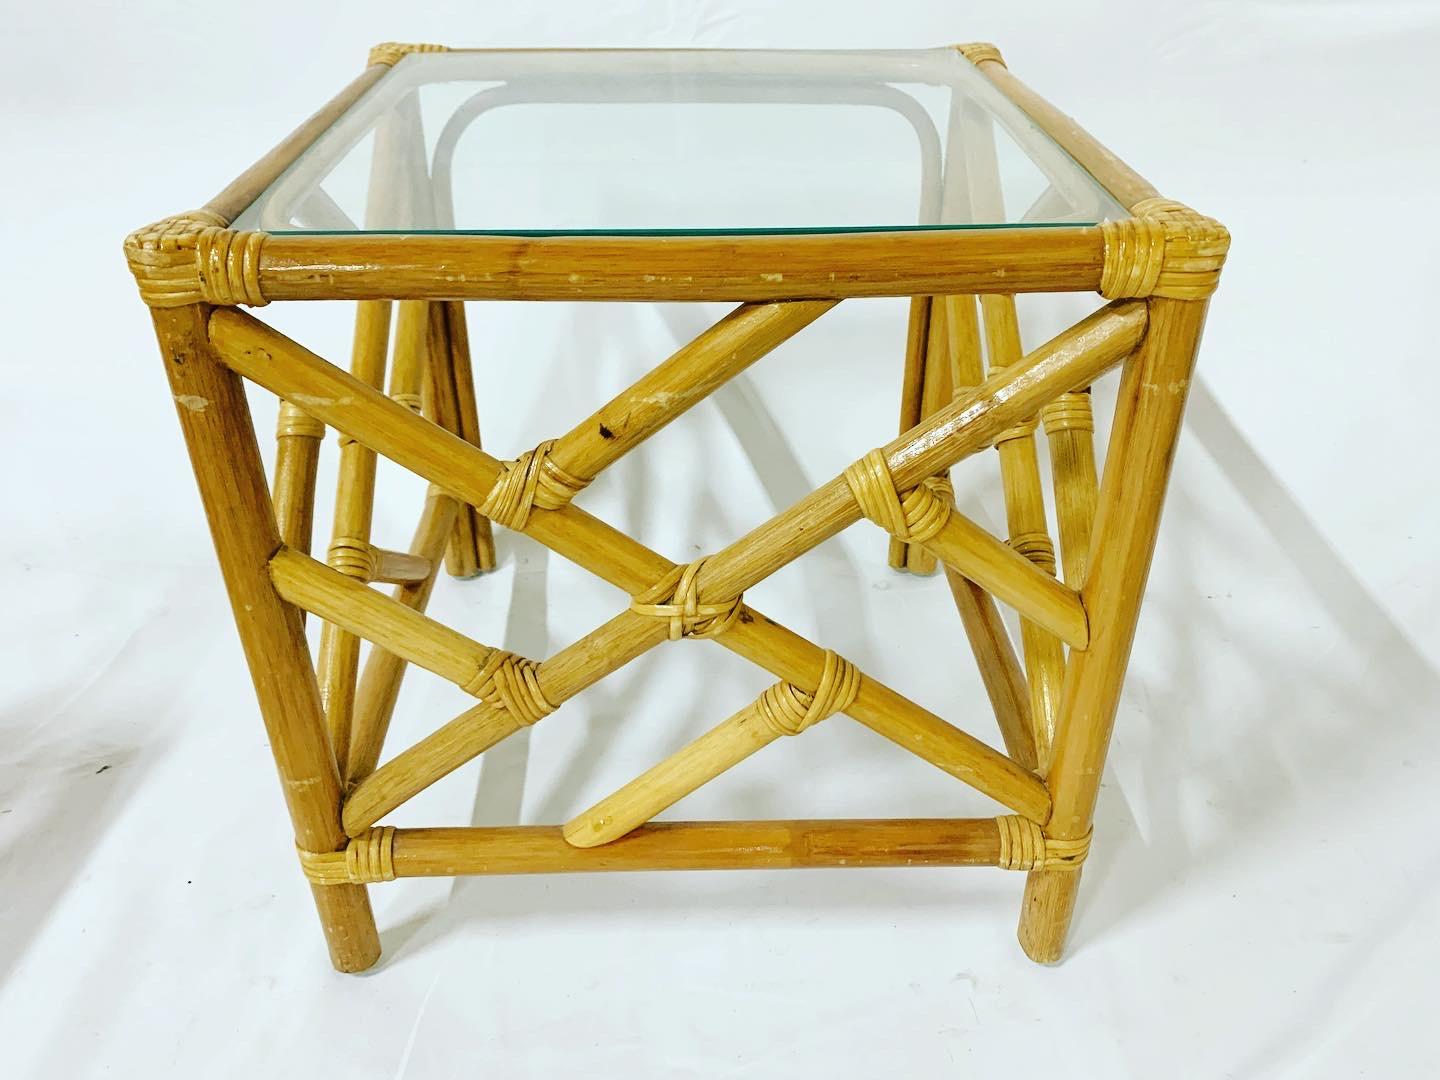 Chippendale Bamboo Rattan Nesting Tables – Set of 3 1